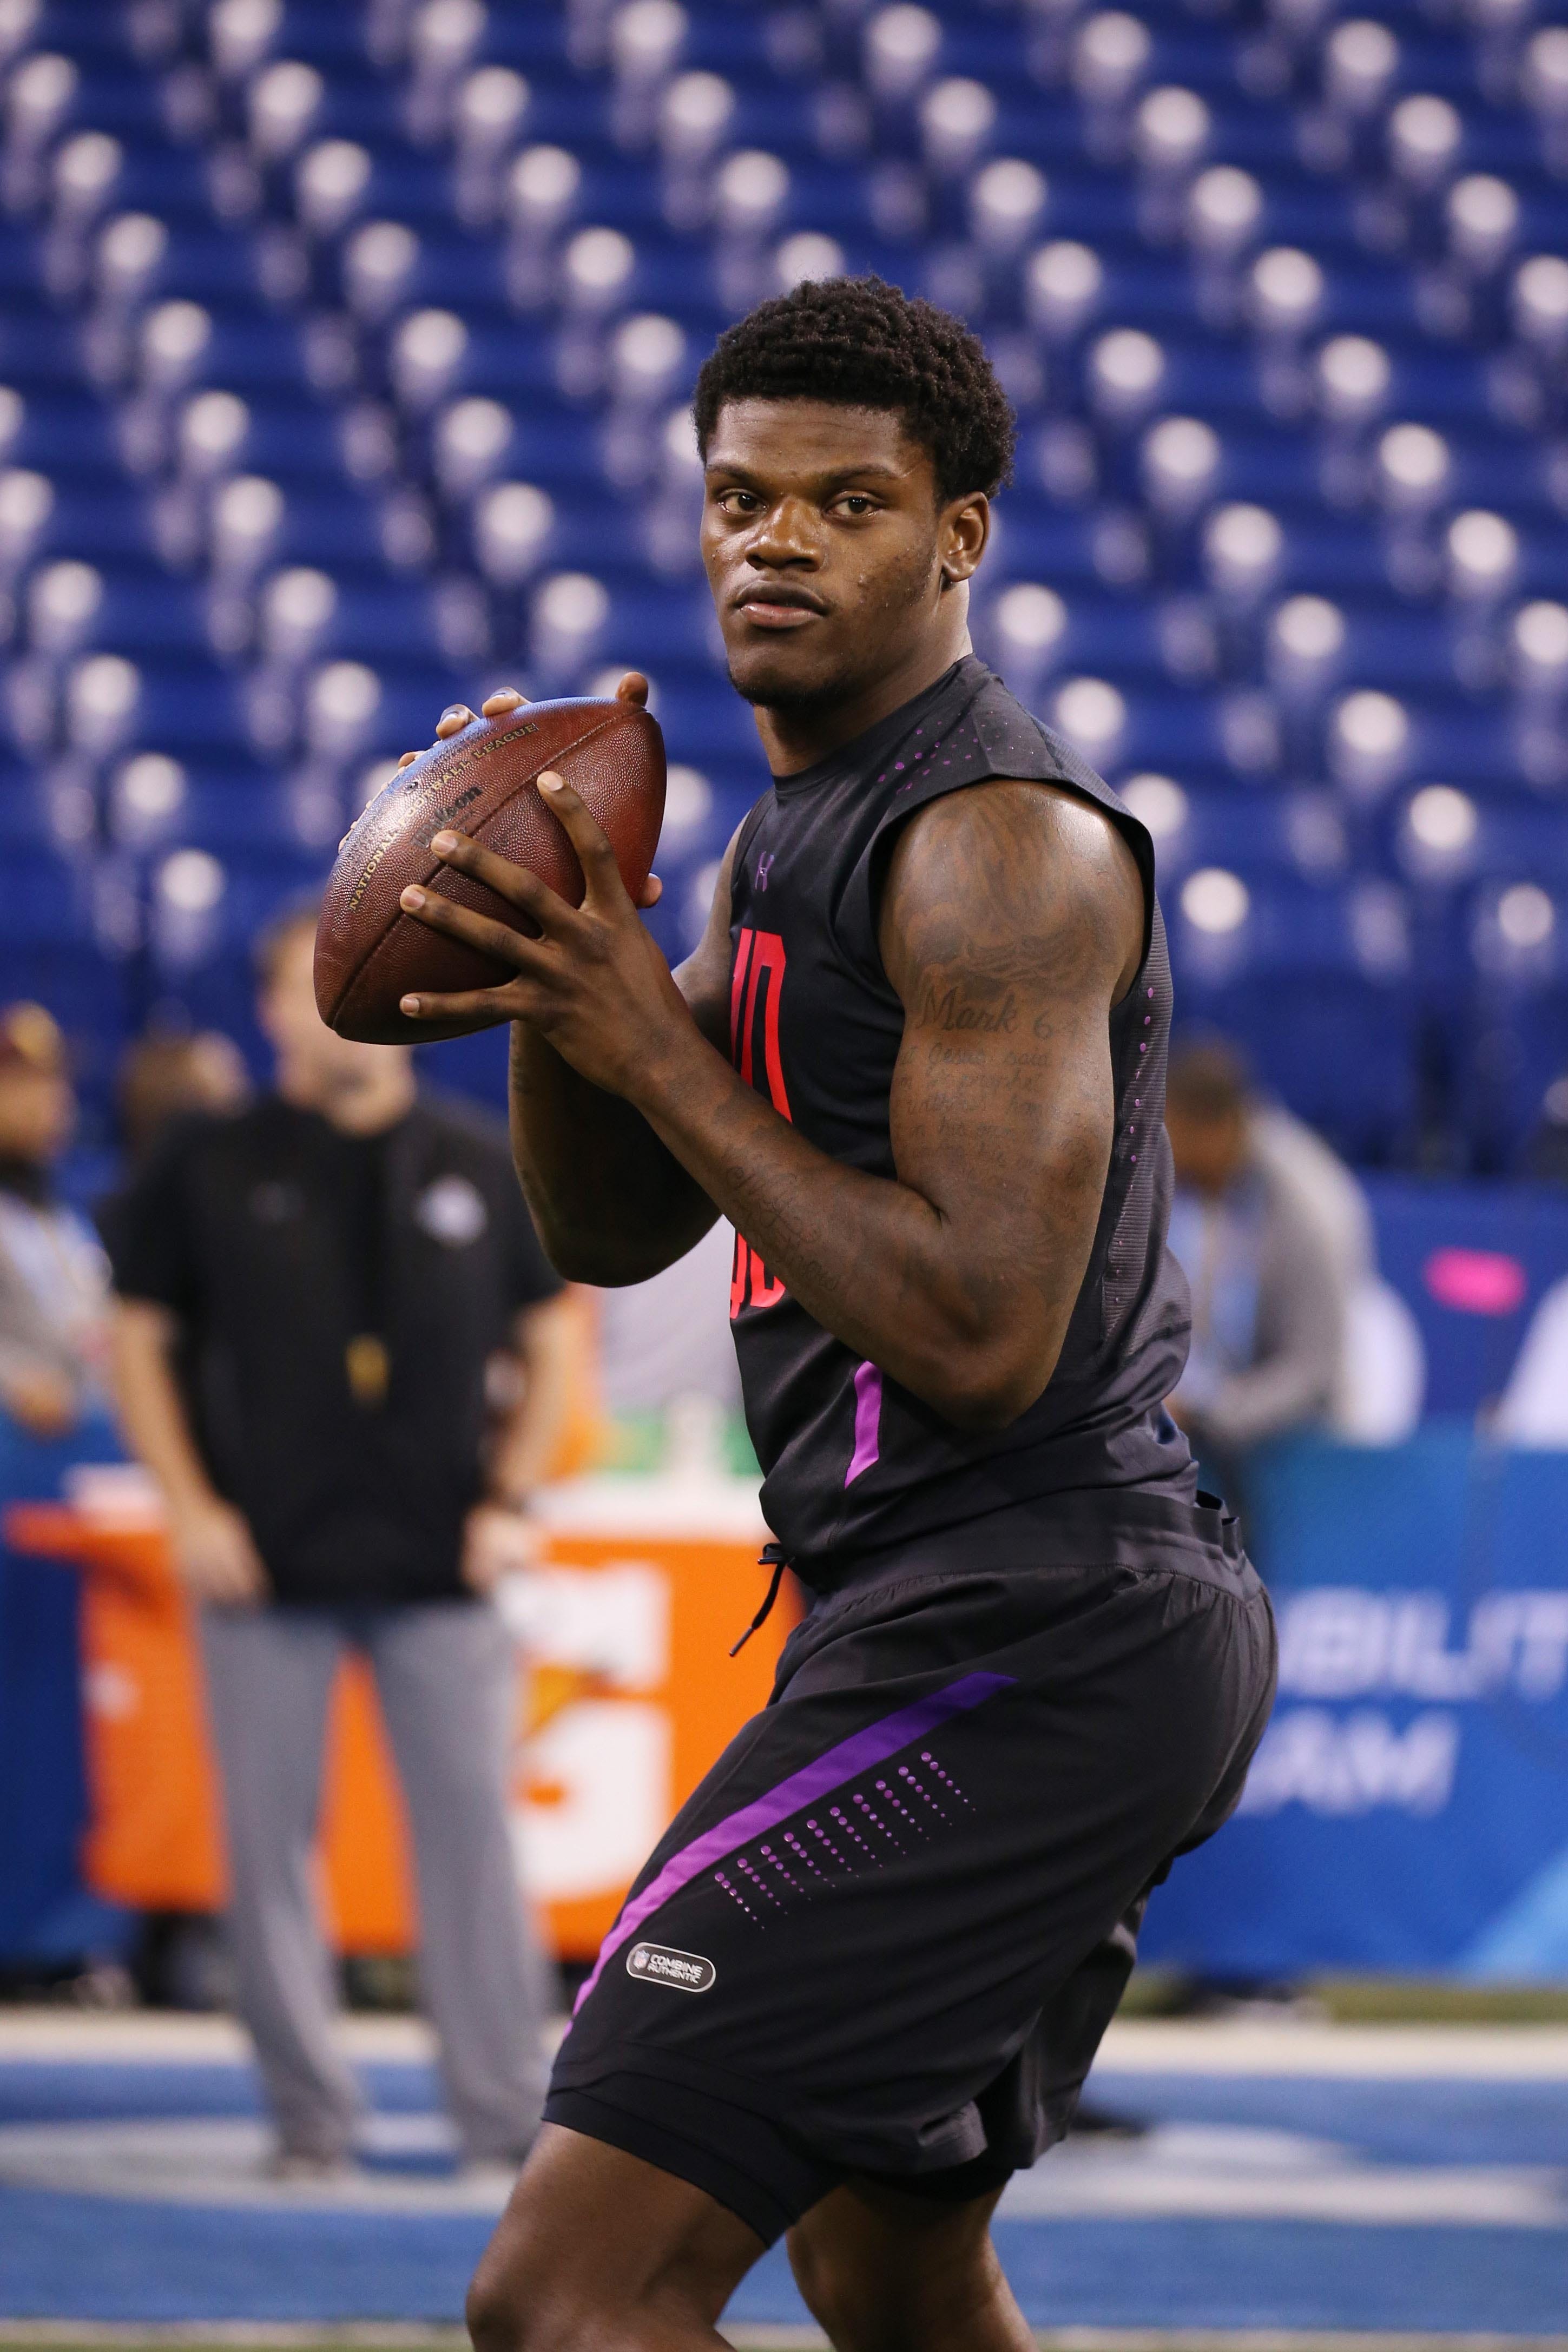 Why Louisville quarterback Lamar Jackson is the most intriguing player in the NFL Draft